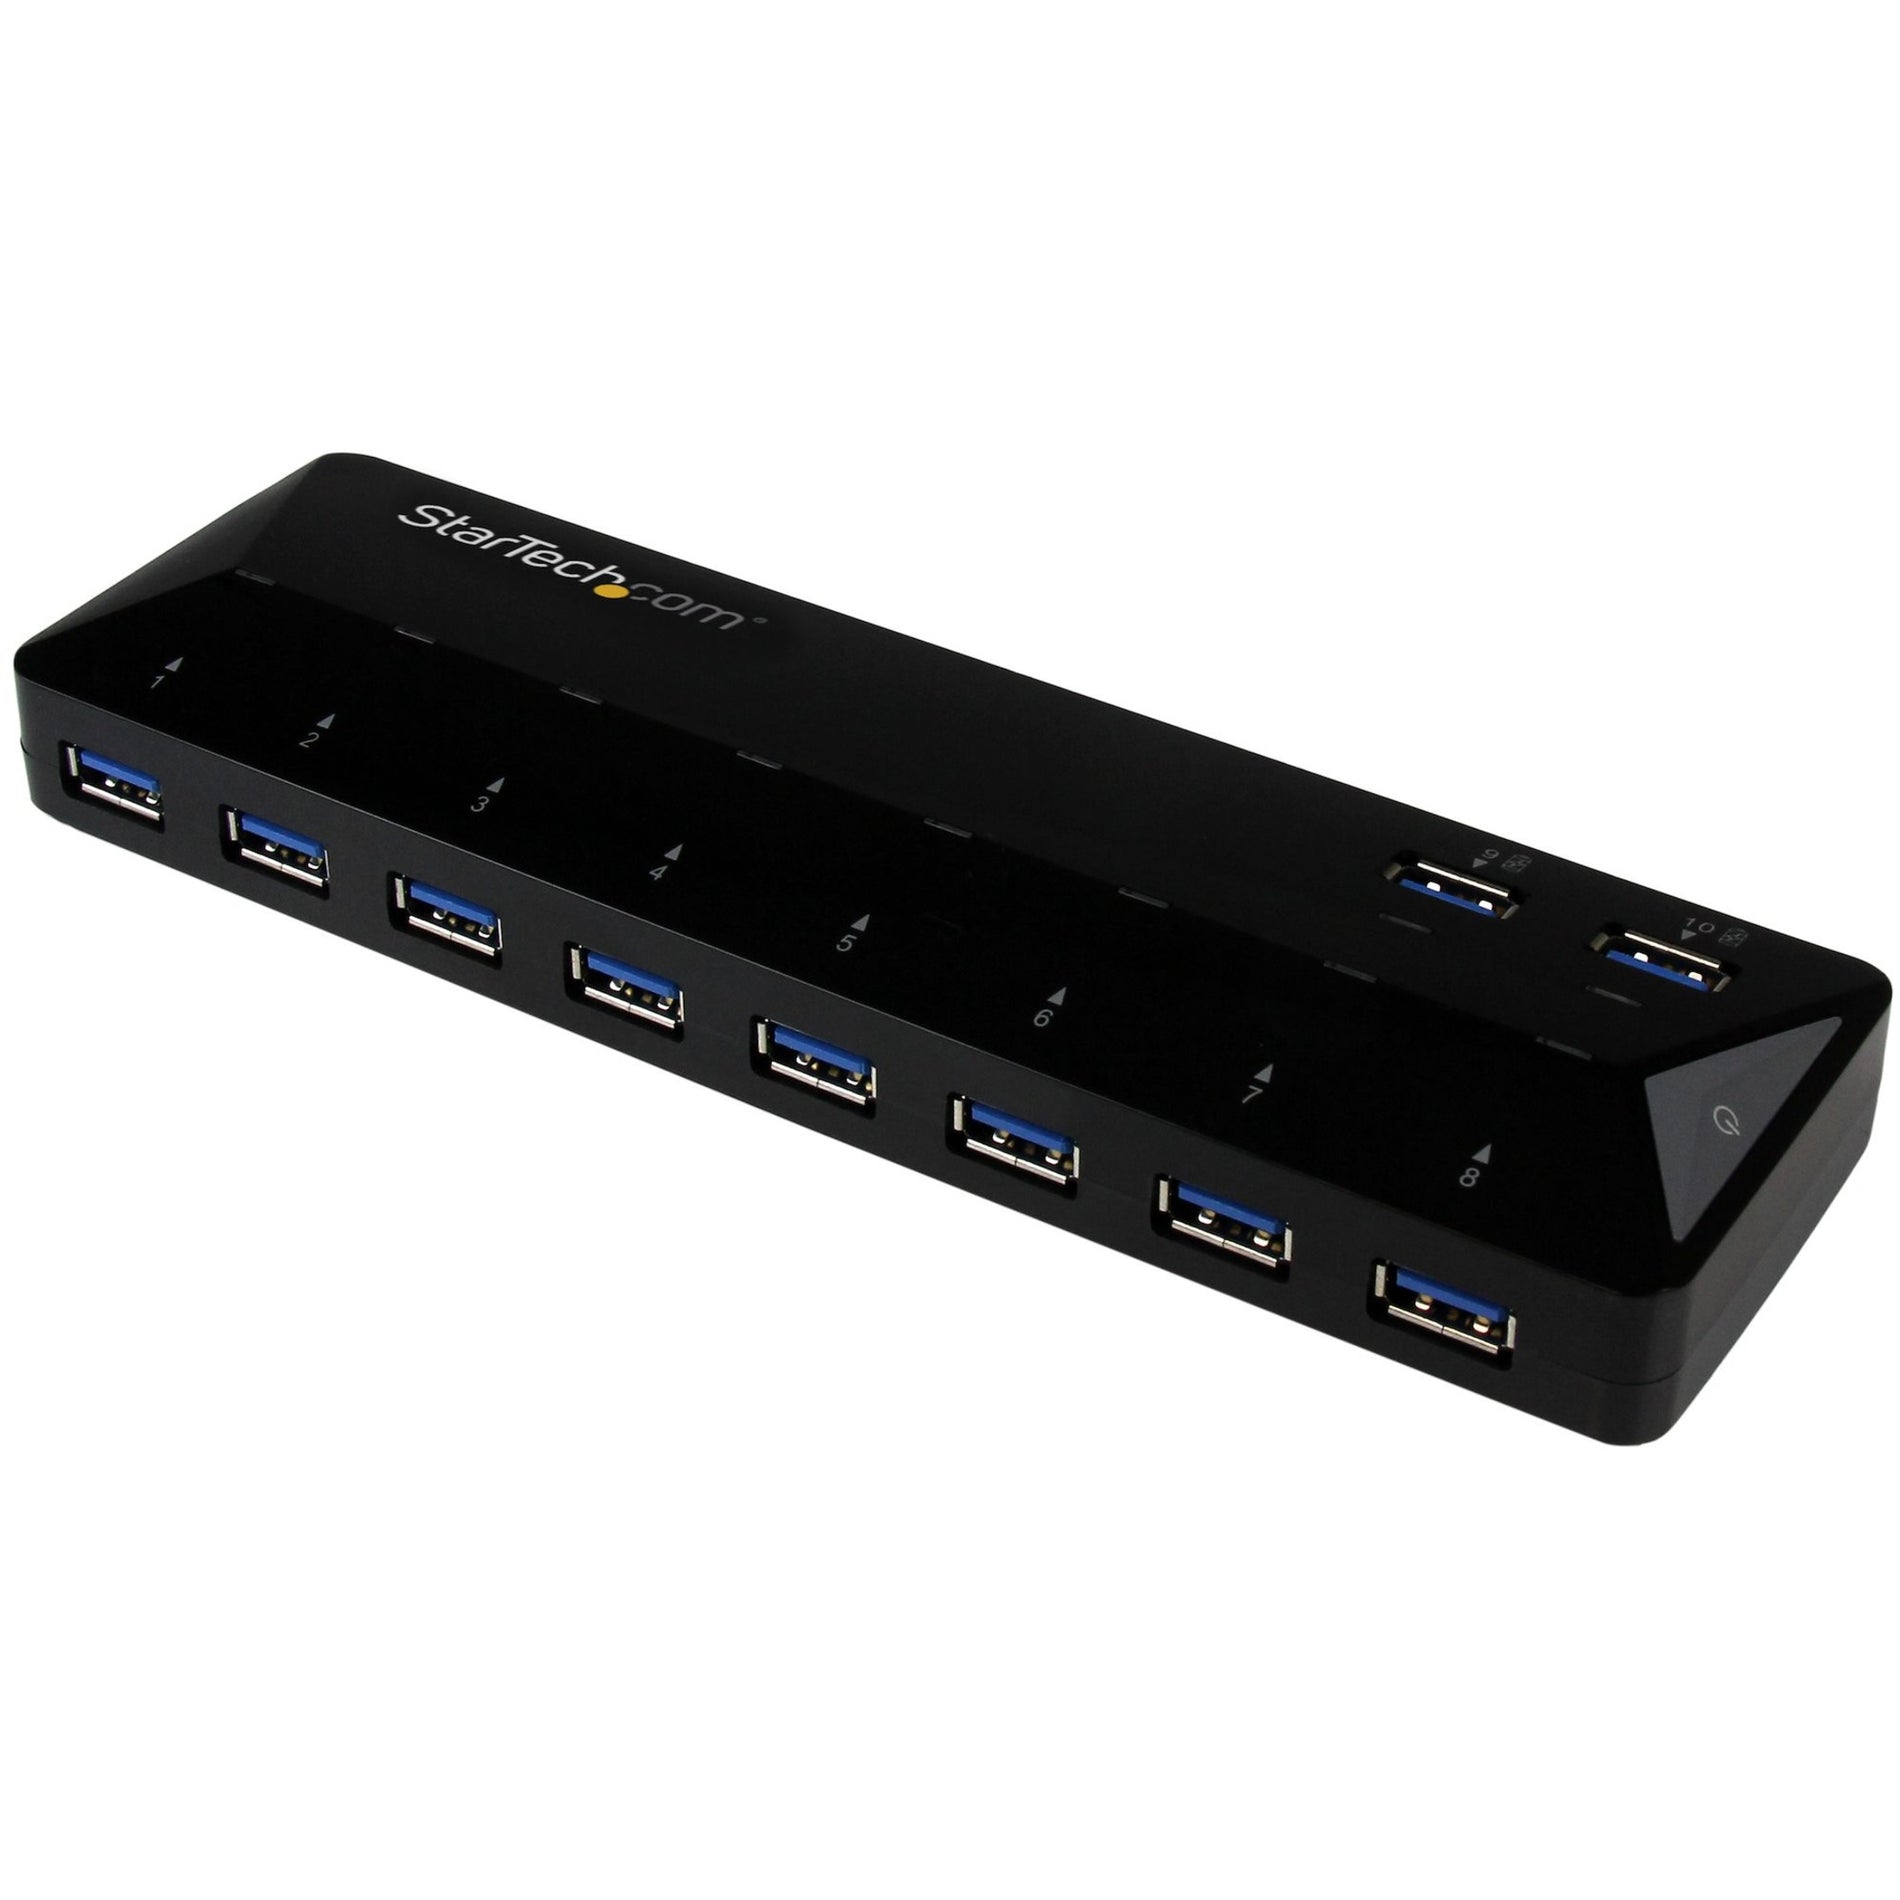 StarTech.com ST103008U2C 10-Port USB 3.0 Hub with Charge and Sync Ports, Fast-Charging Station, Black